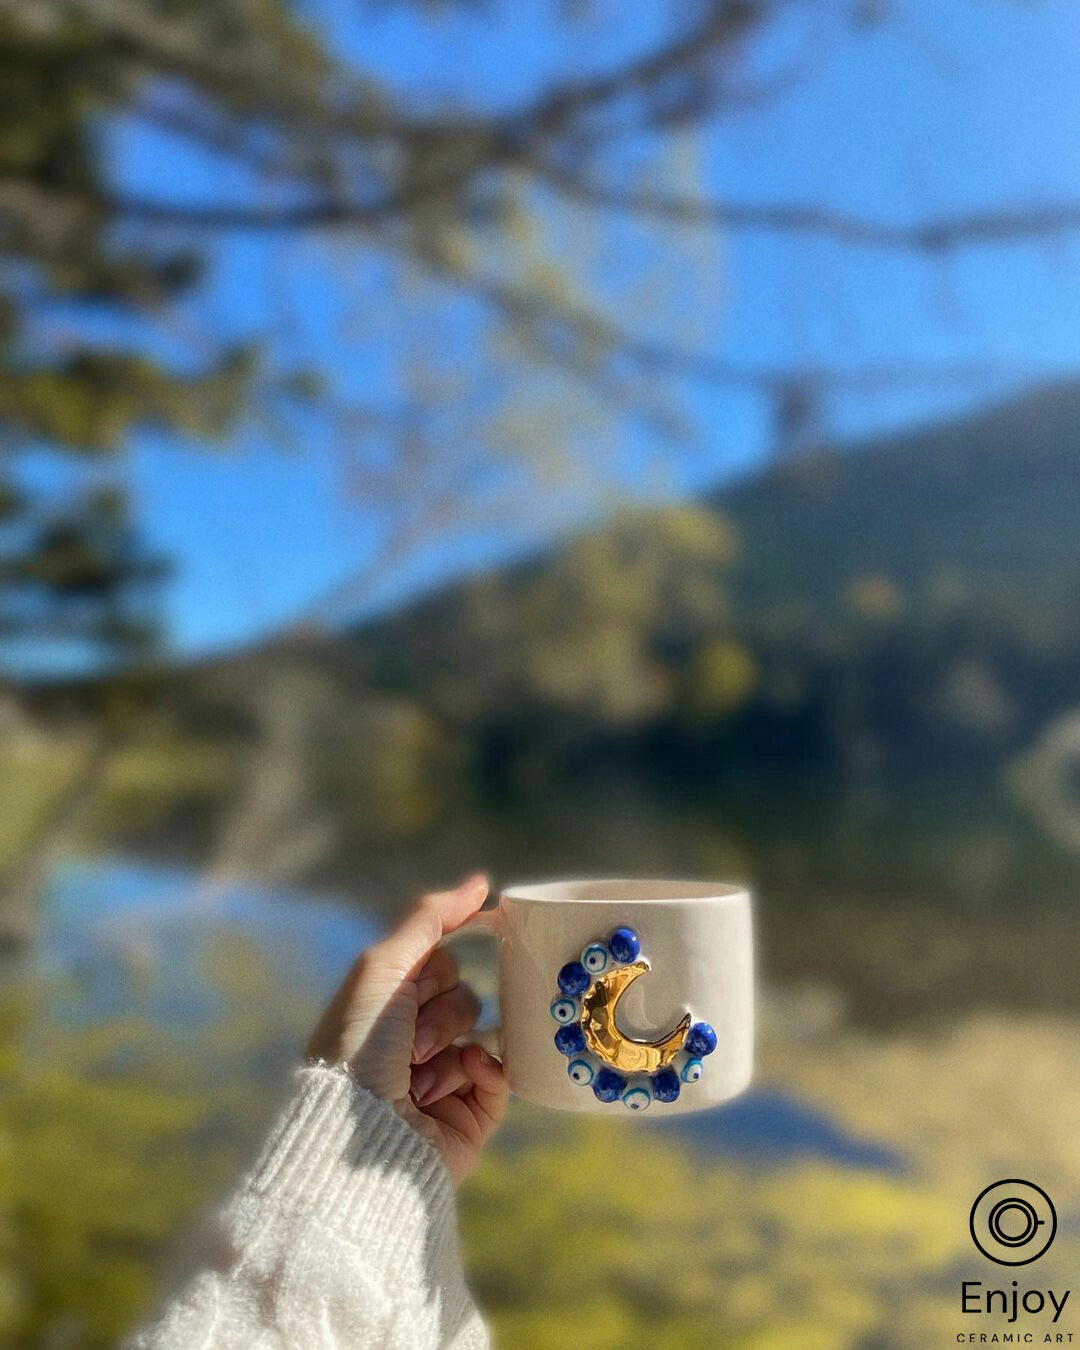 A hand holding a 'Blue Moon' ceramic mug with gold crescent and blue bead details, with a blurred natural landscape in the background, evoking a sense of warmth and tranquility.